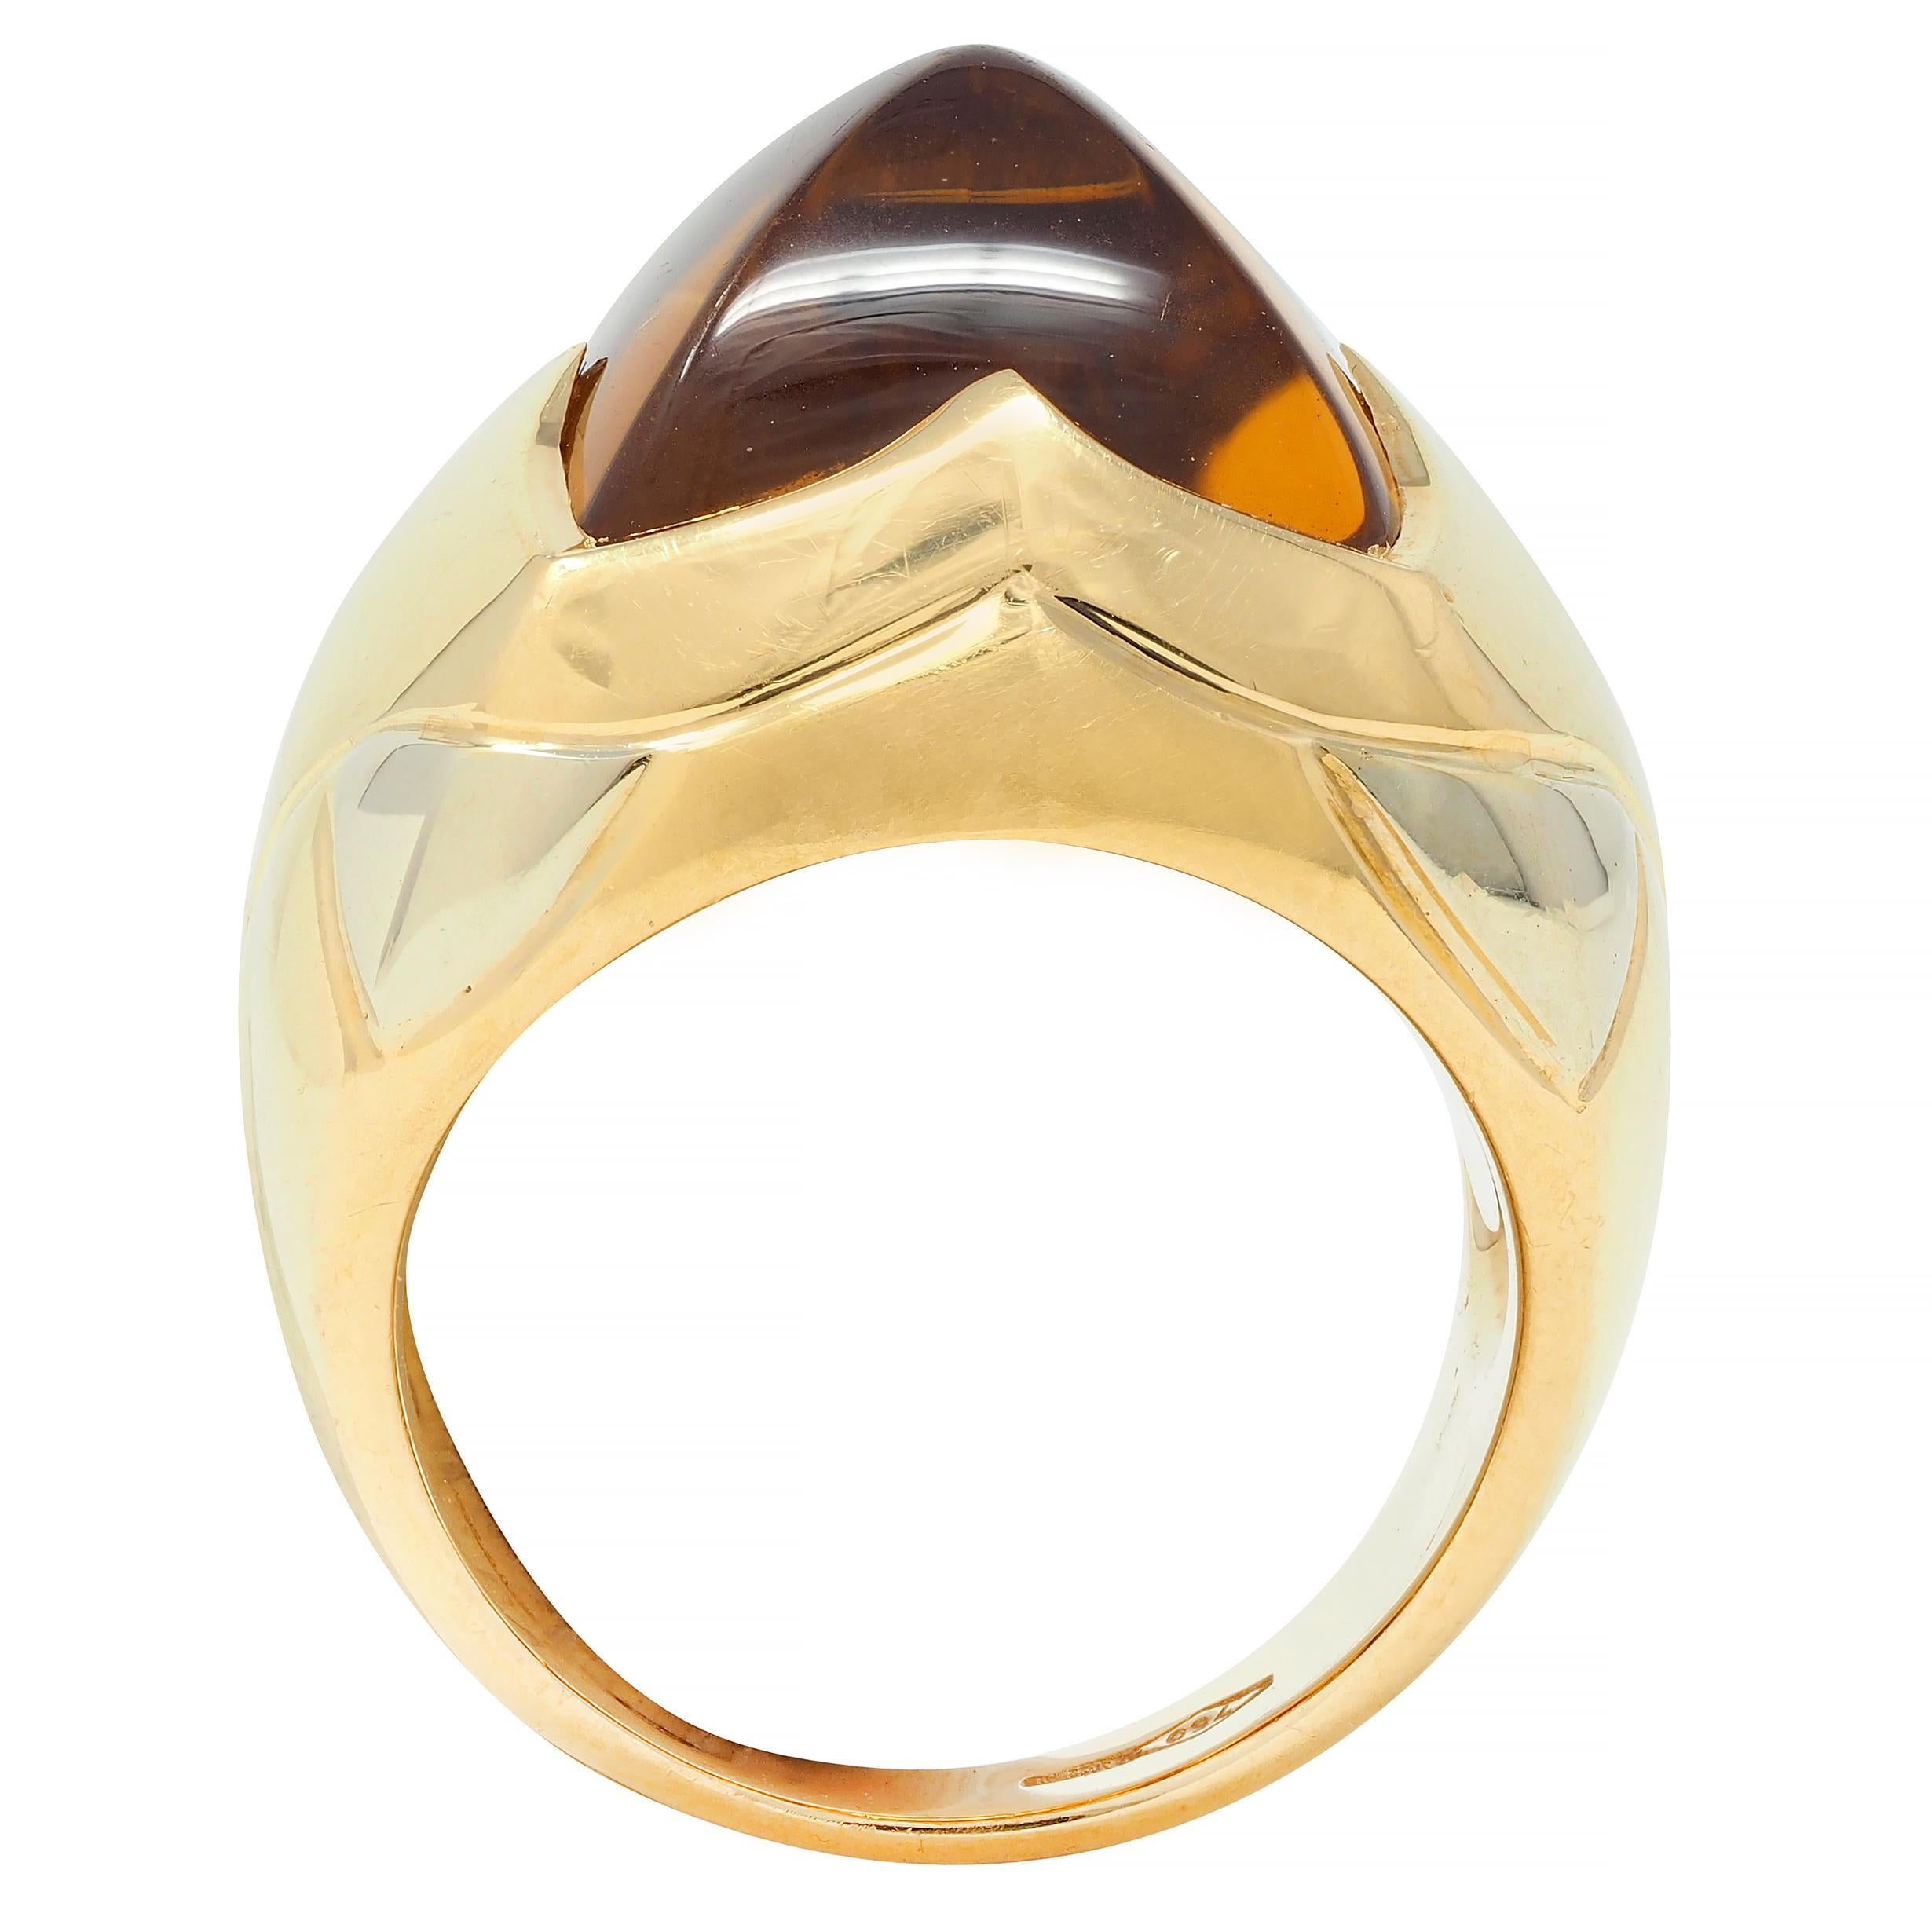 Designed as a domed pyramid form comprised of segmented two-tone gold
Centering a pyramid-shaped citrine cabochon 
Transparent medium brownish yellow
Accented by white gold petal motifs
Completed by a yellow gold shank
Stamped with Italian assay